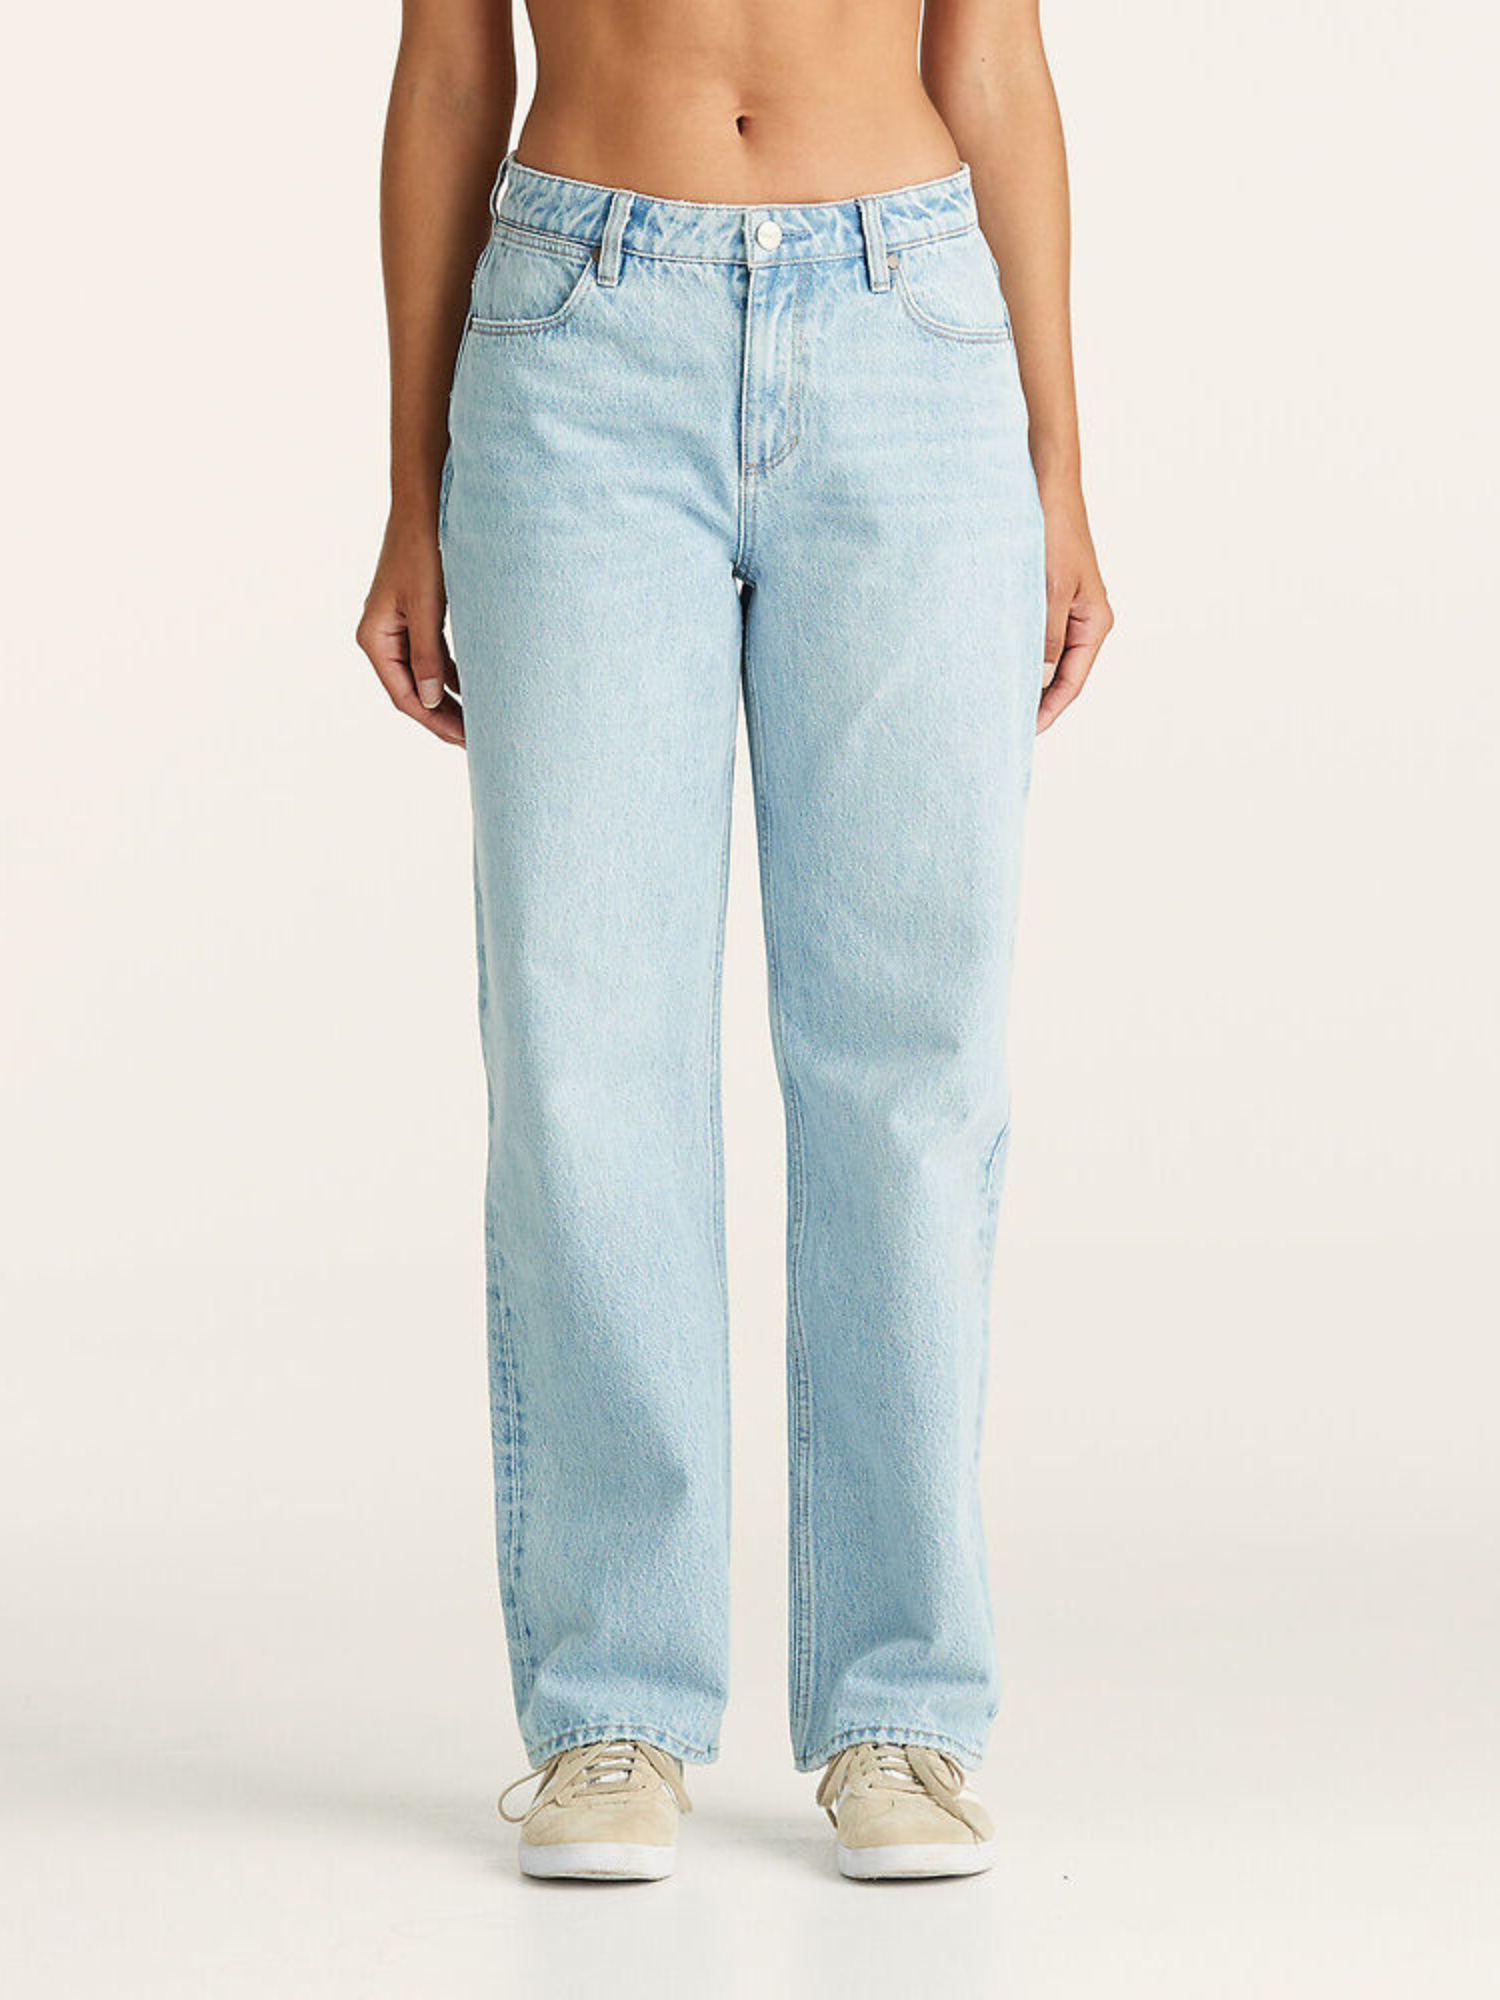 Wrangler Mid Bella Baggy Relaxed Jean - Blues Dynasty